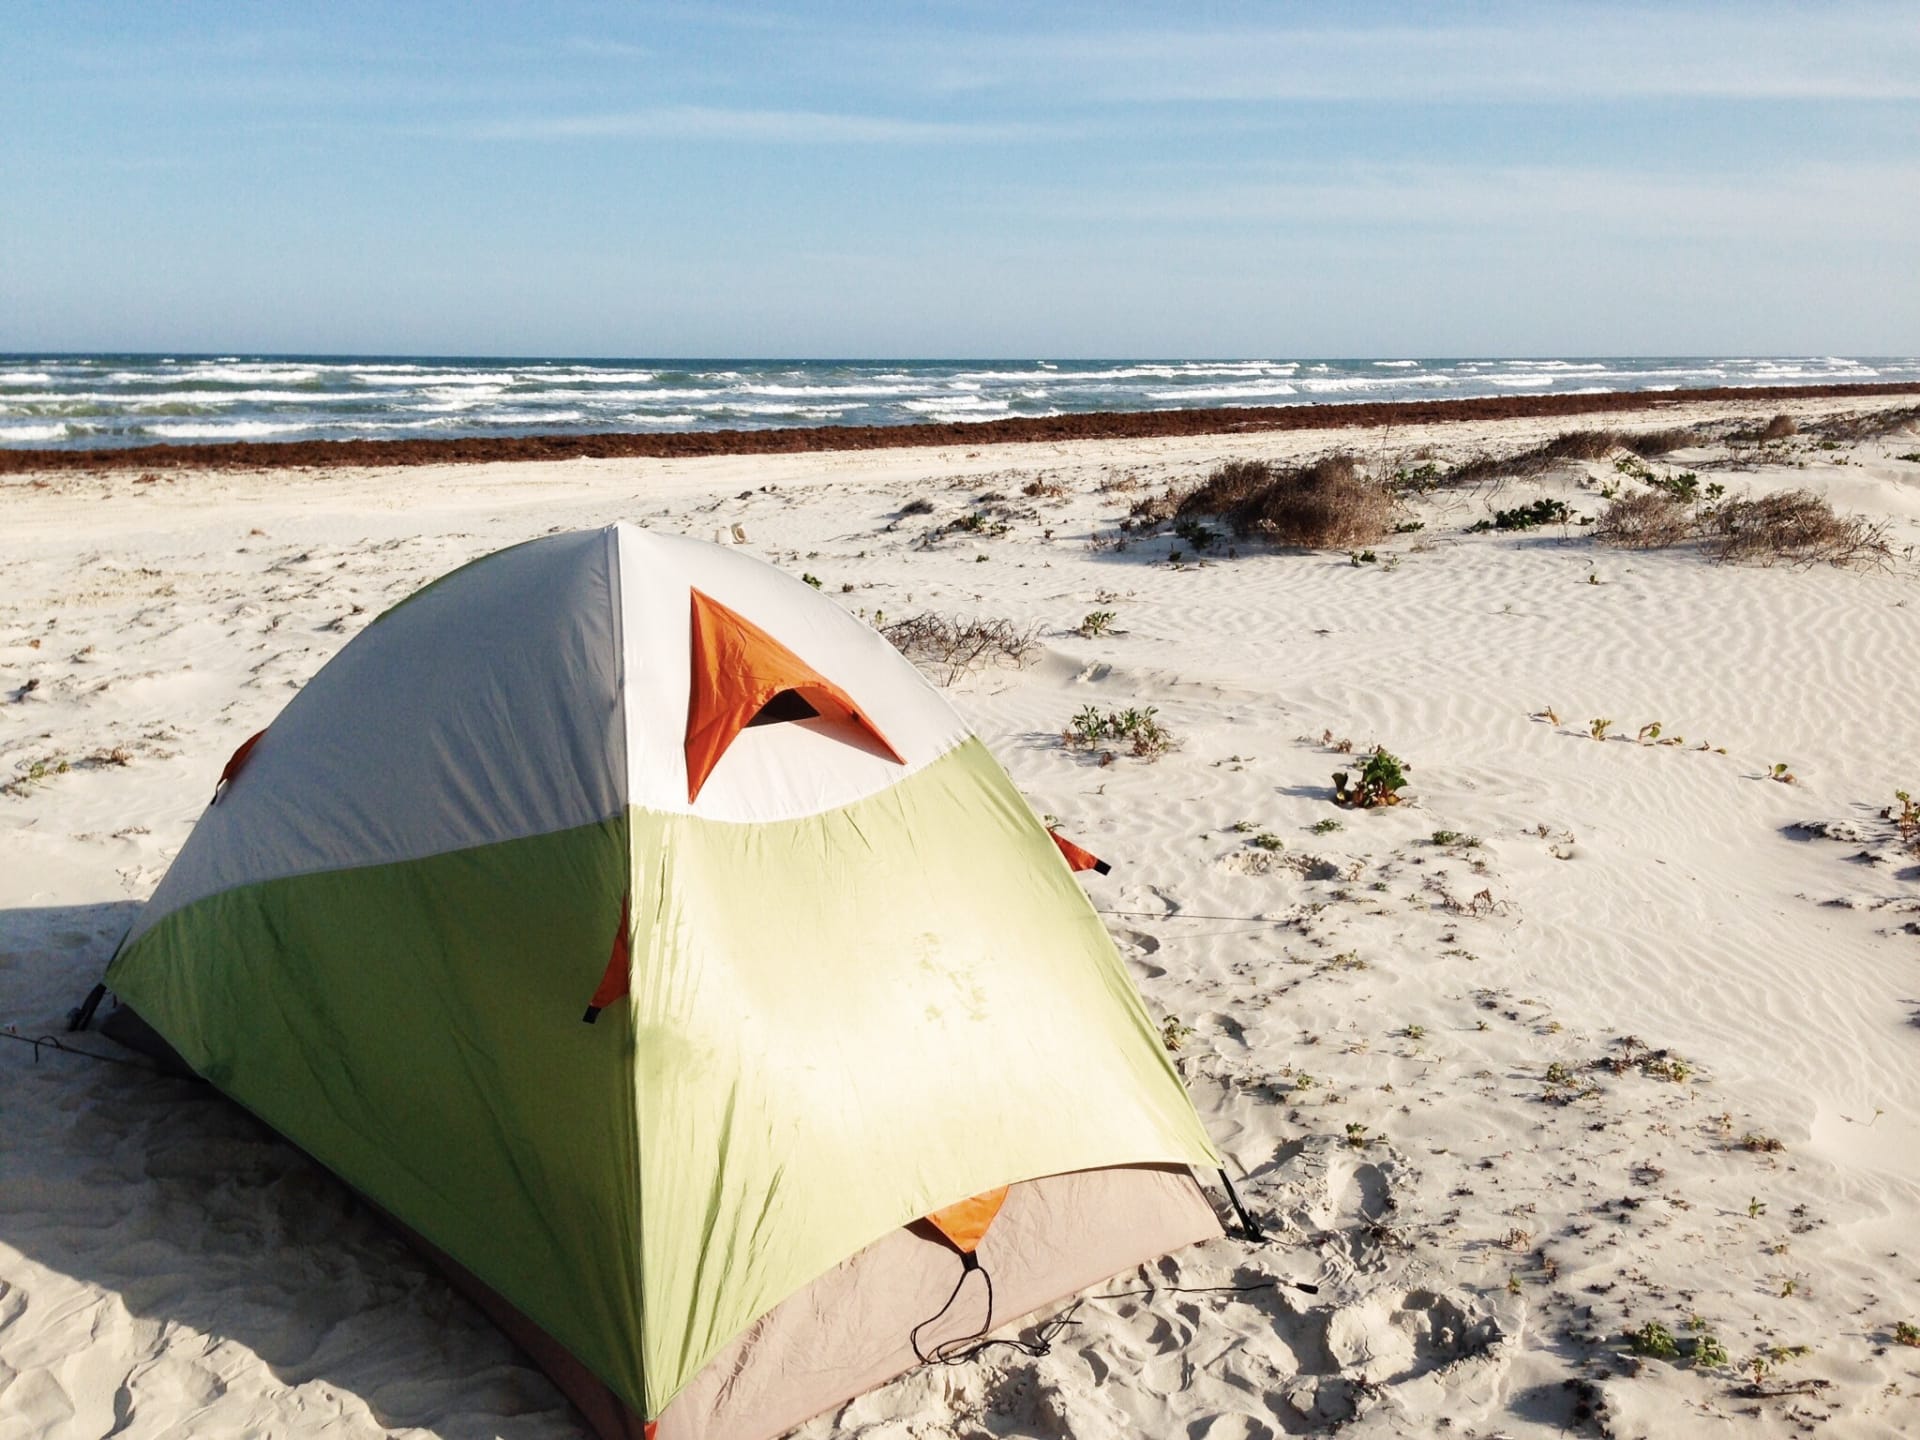 Camp anywhere on the beach, no designated sites!